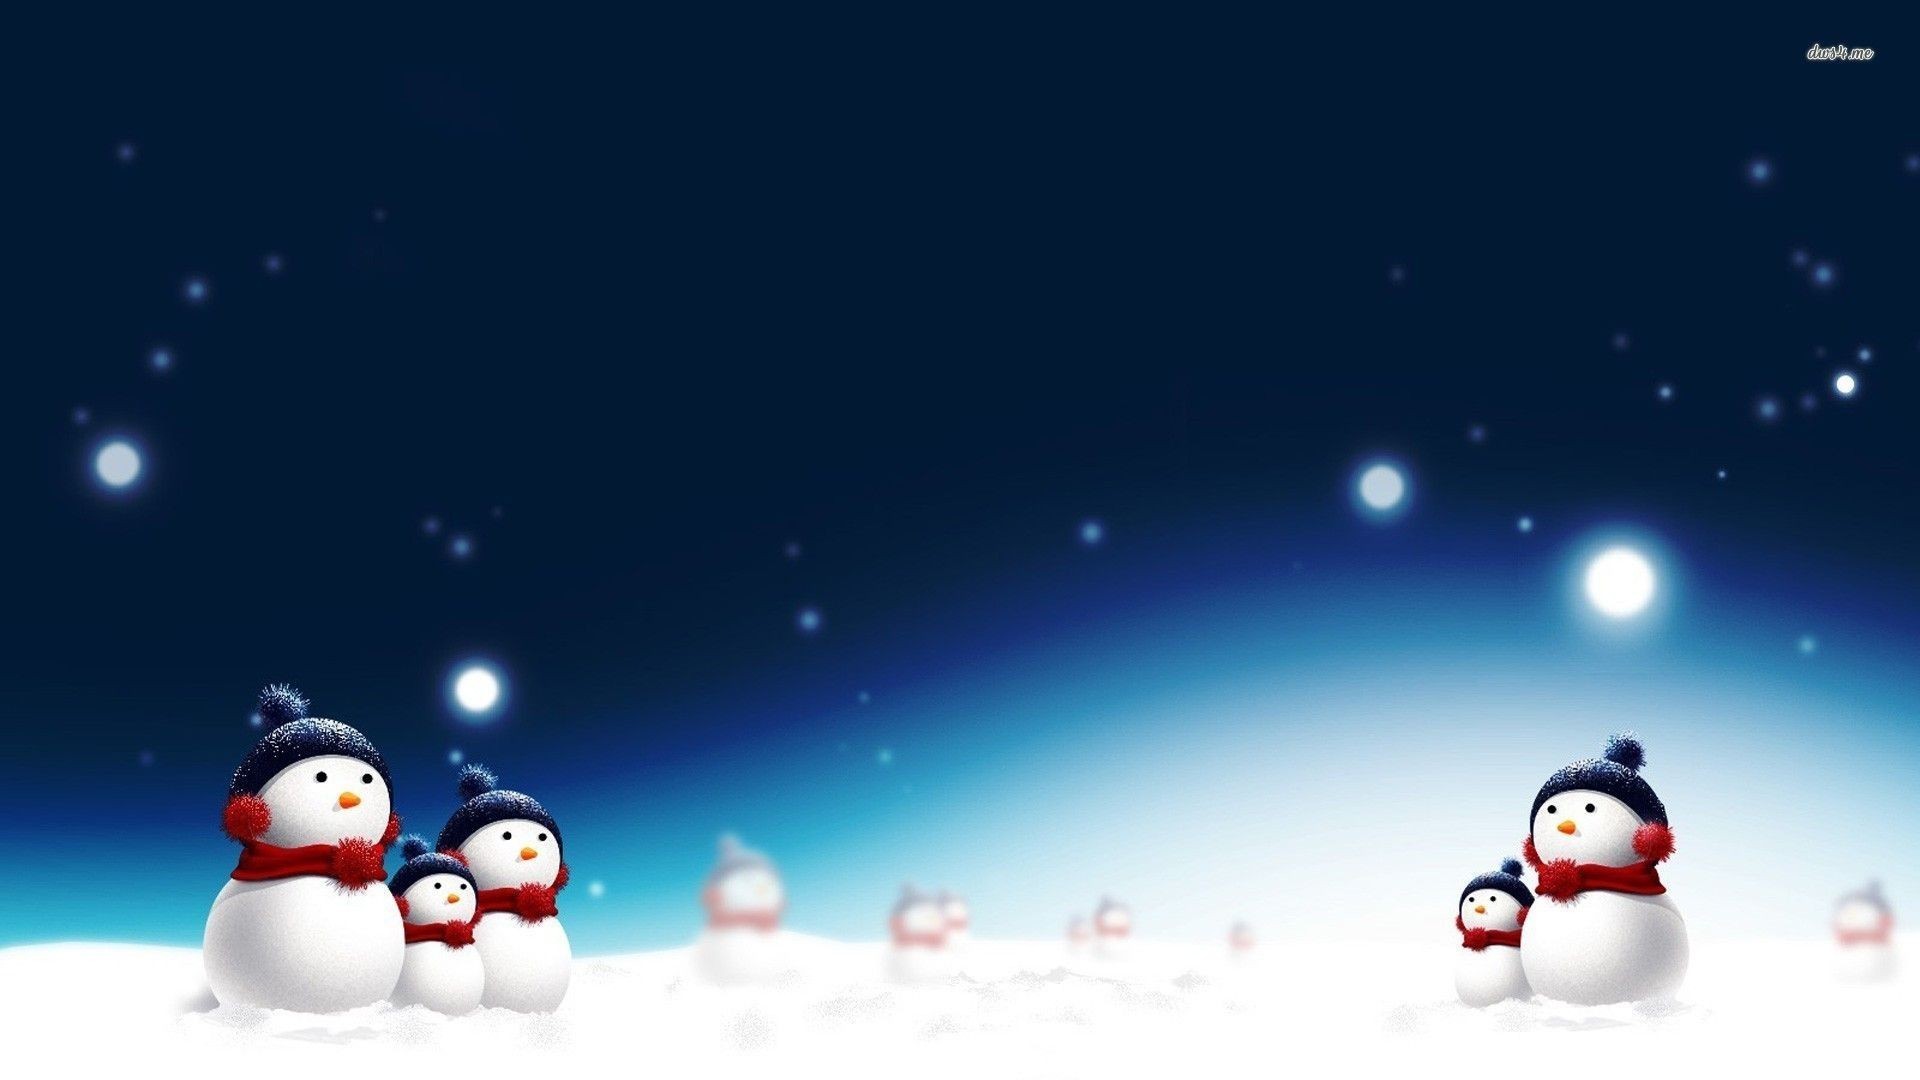 1920x1080 1920x1200 A High Definition christmas wallpaper wishing Happy Holidays on  the occasion of Christmas.